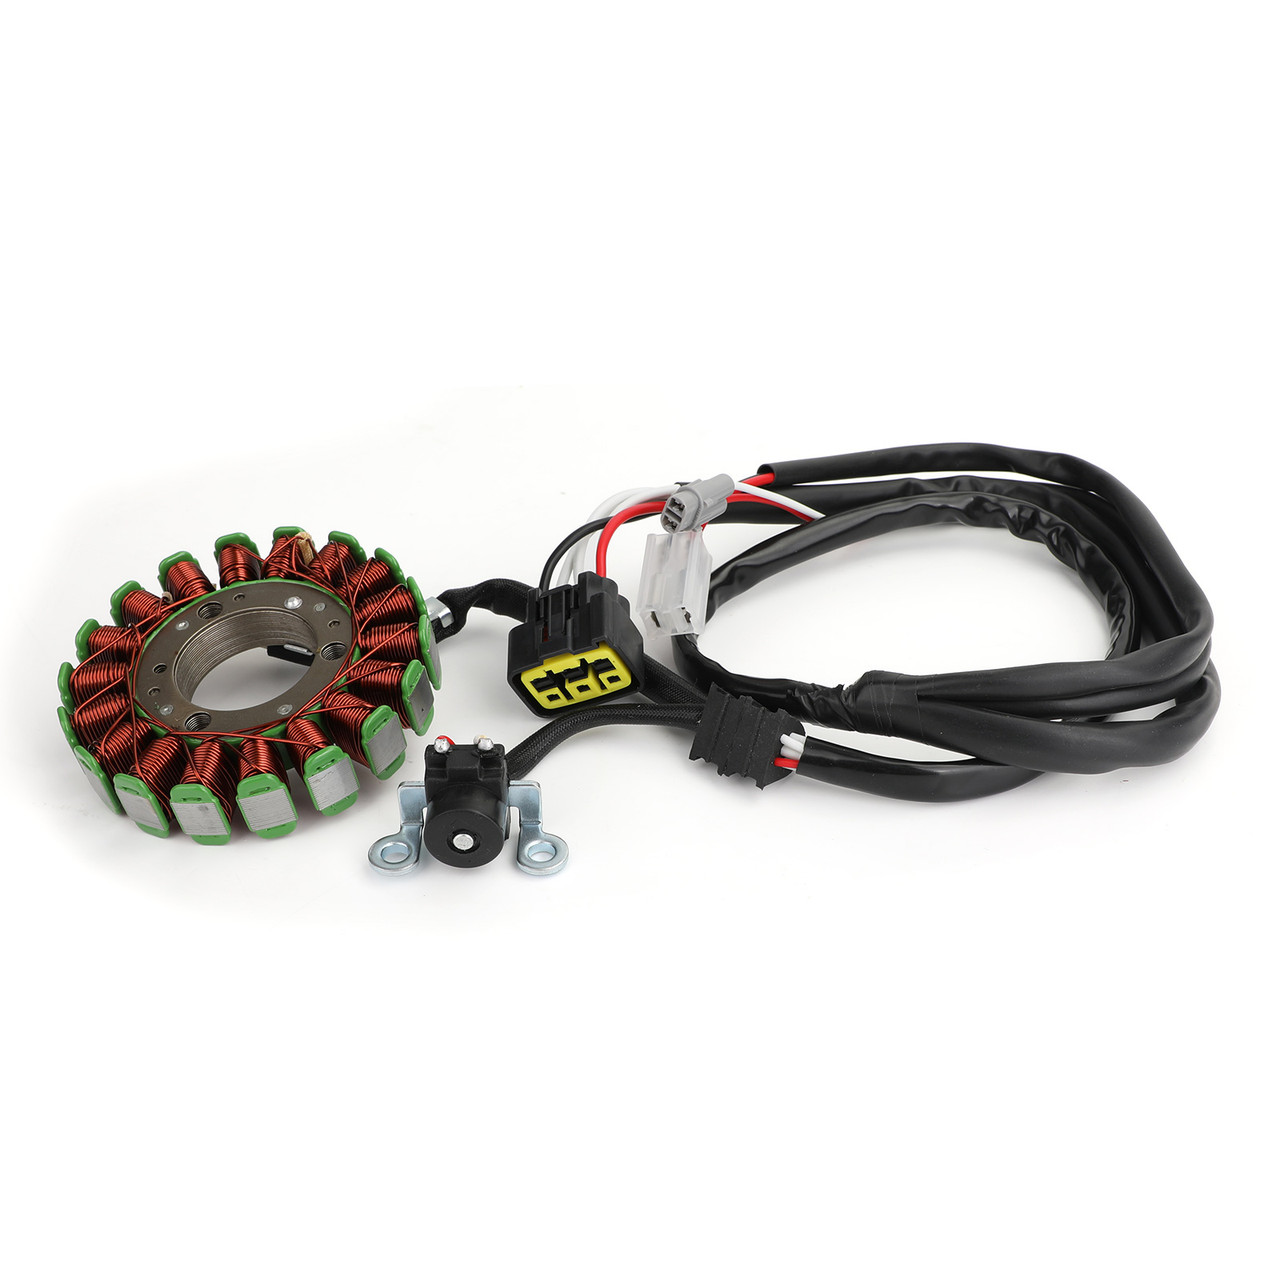 Magneto Generator Engine Stator Coil Fit for Yamaha WR250R 07-17 WR250X 07-12 16-17